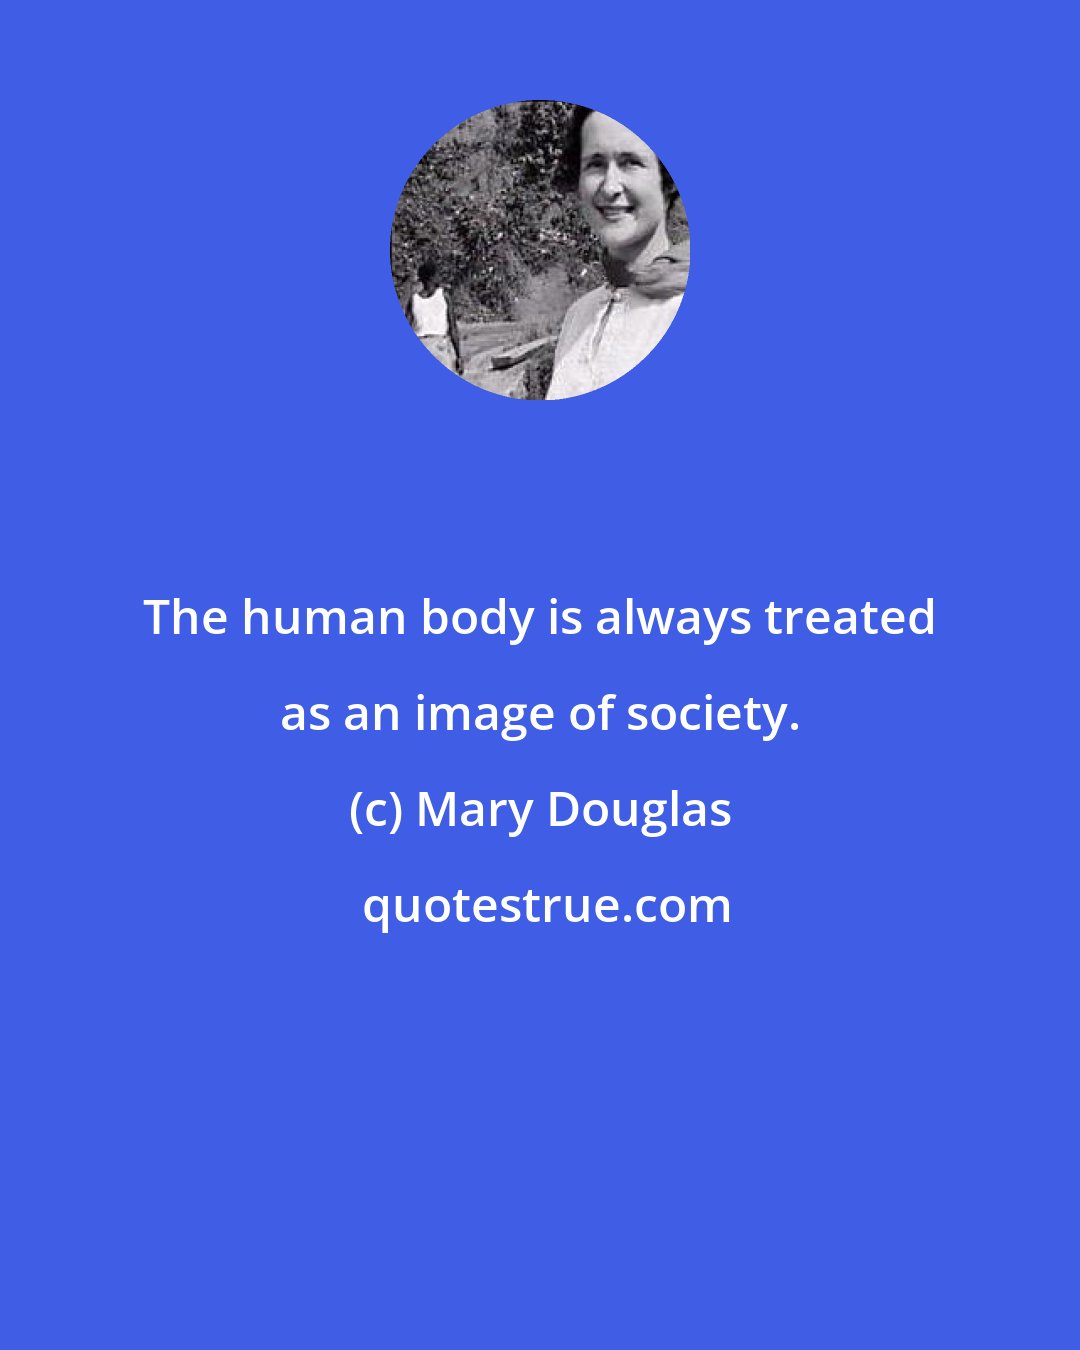 Mary Douglas: The human body is always treated as an image of society.